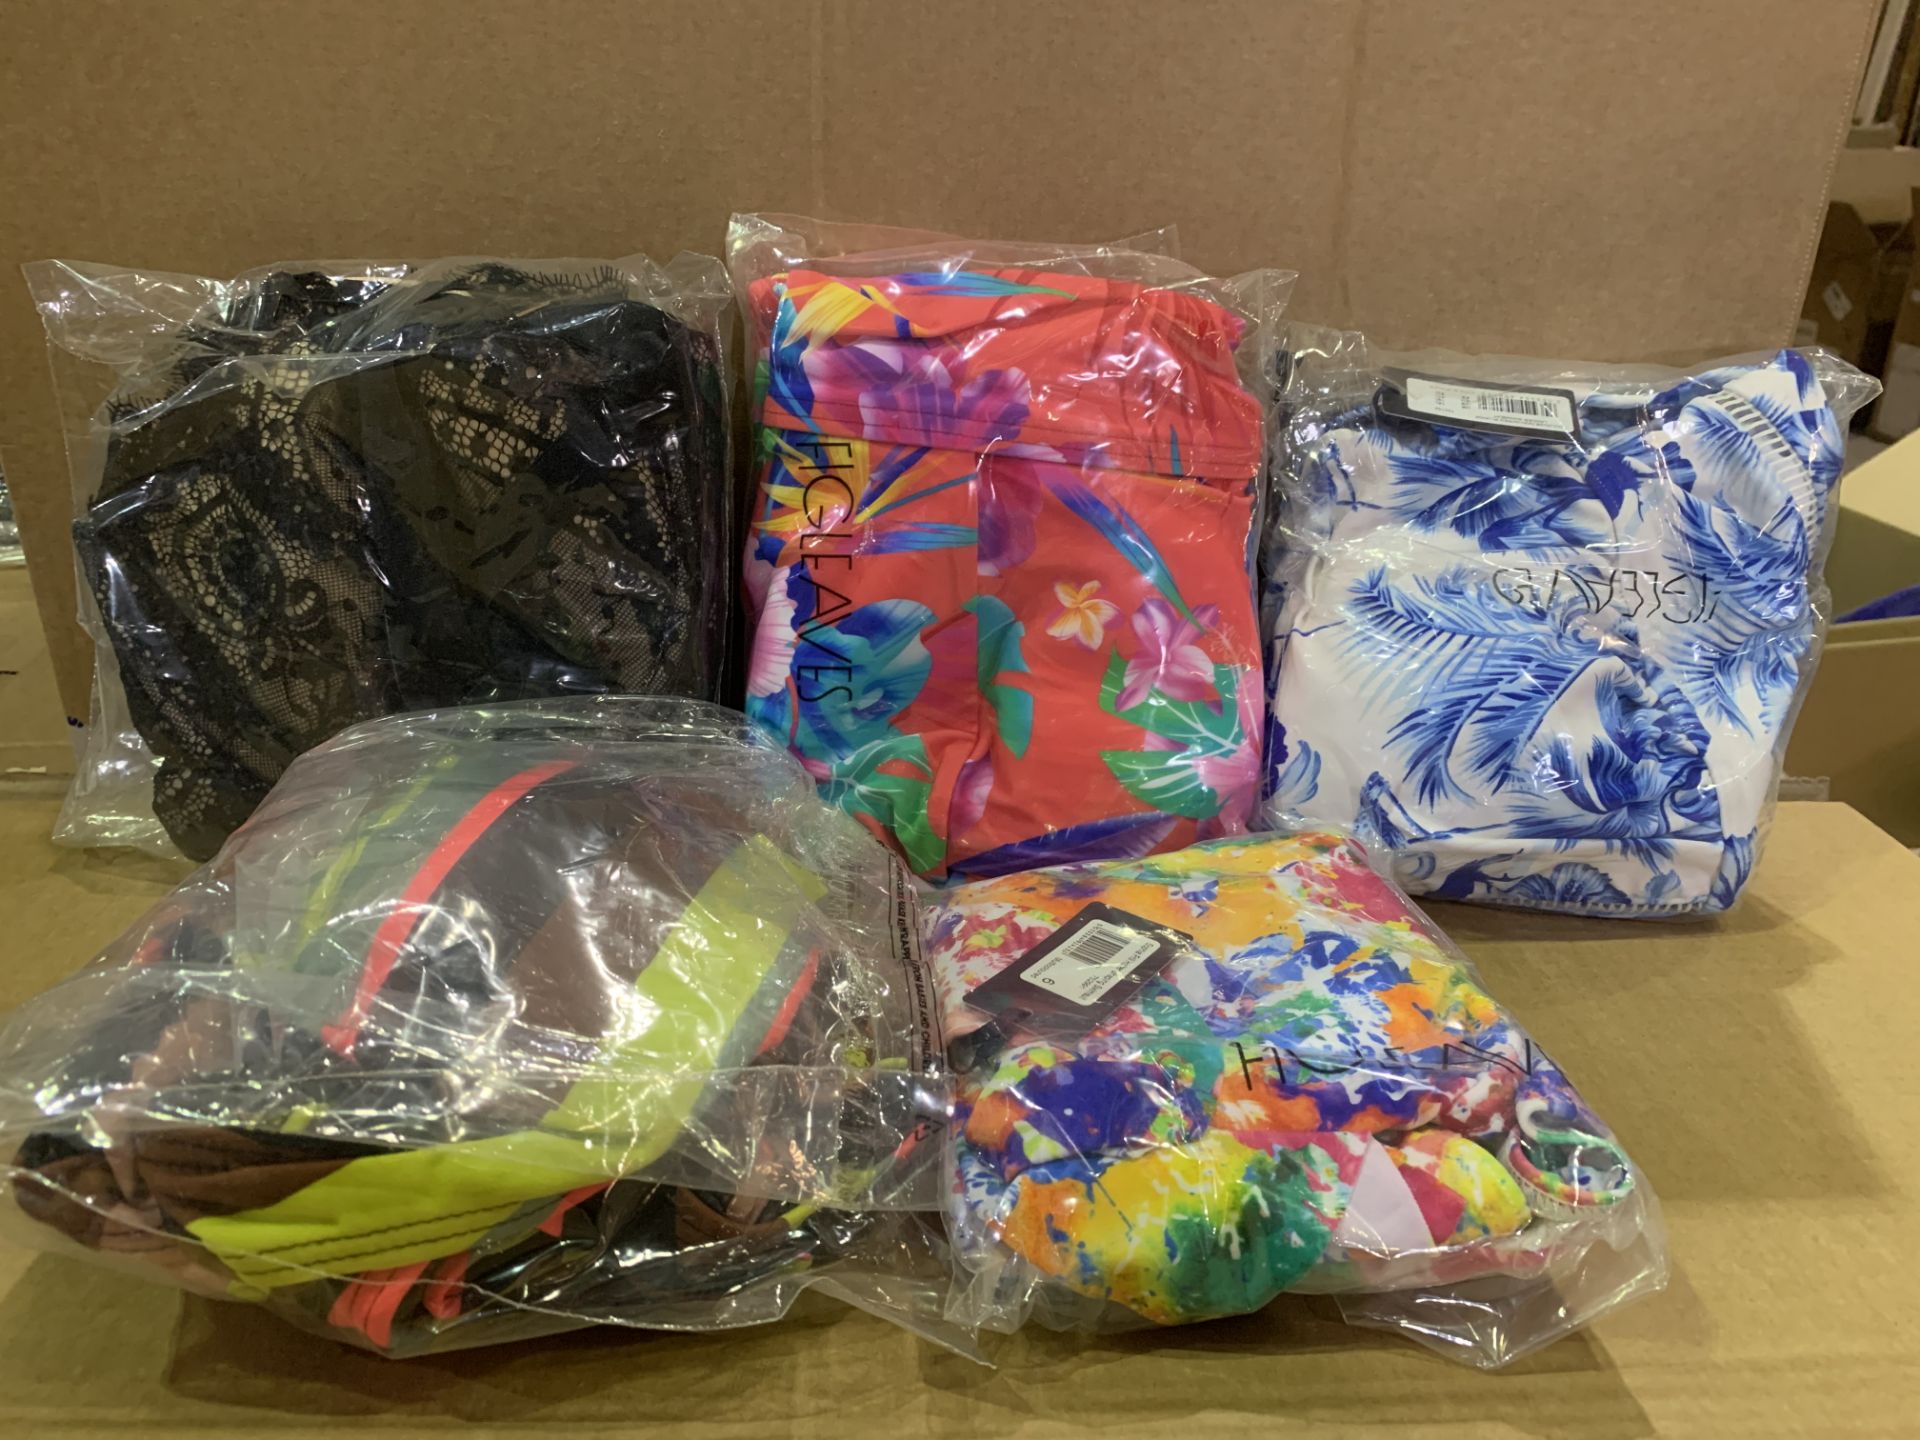 20 X BRAND NEW INDIVIDUALLY PACKAGED VARIOUS FIGLEAVES SWIMWEAR AND UNDERWEAR IN VARIOUS STYLES